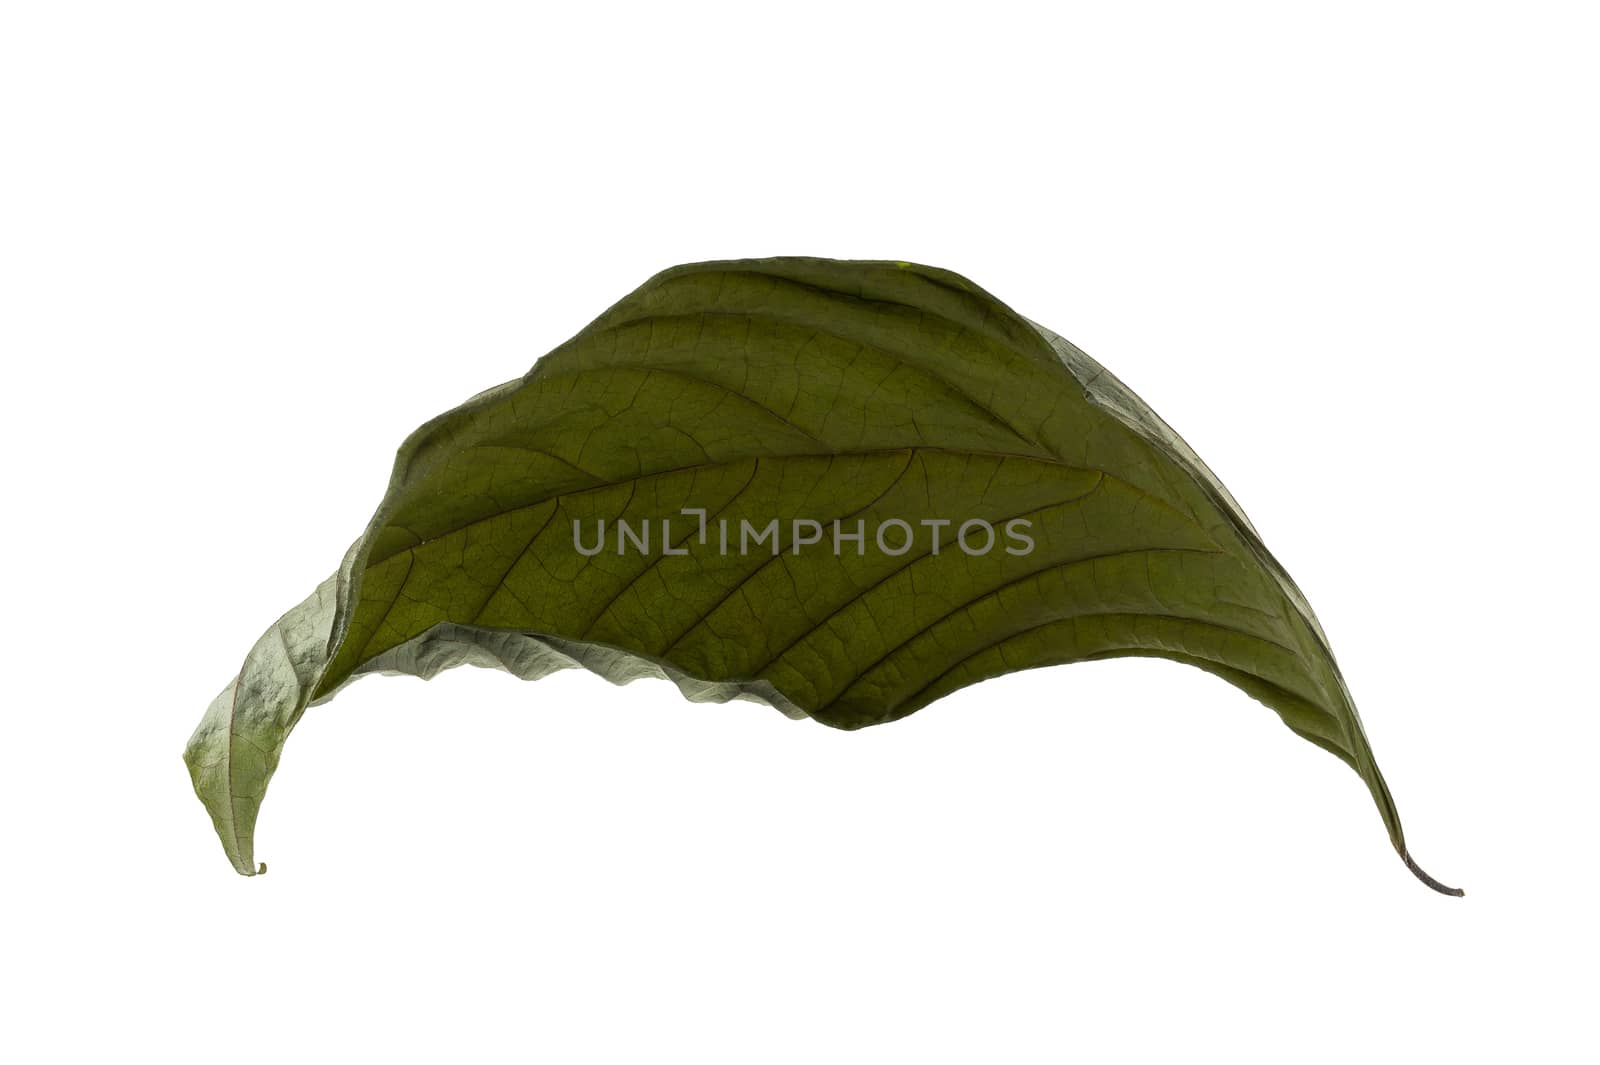 Dry leaf isolated on a white background.